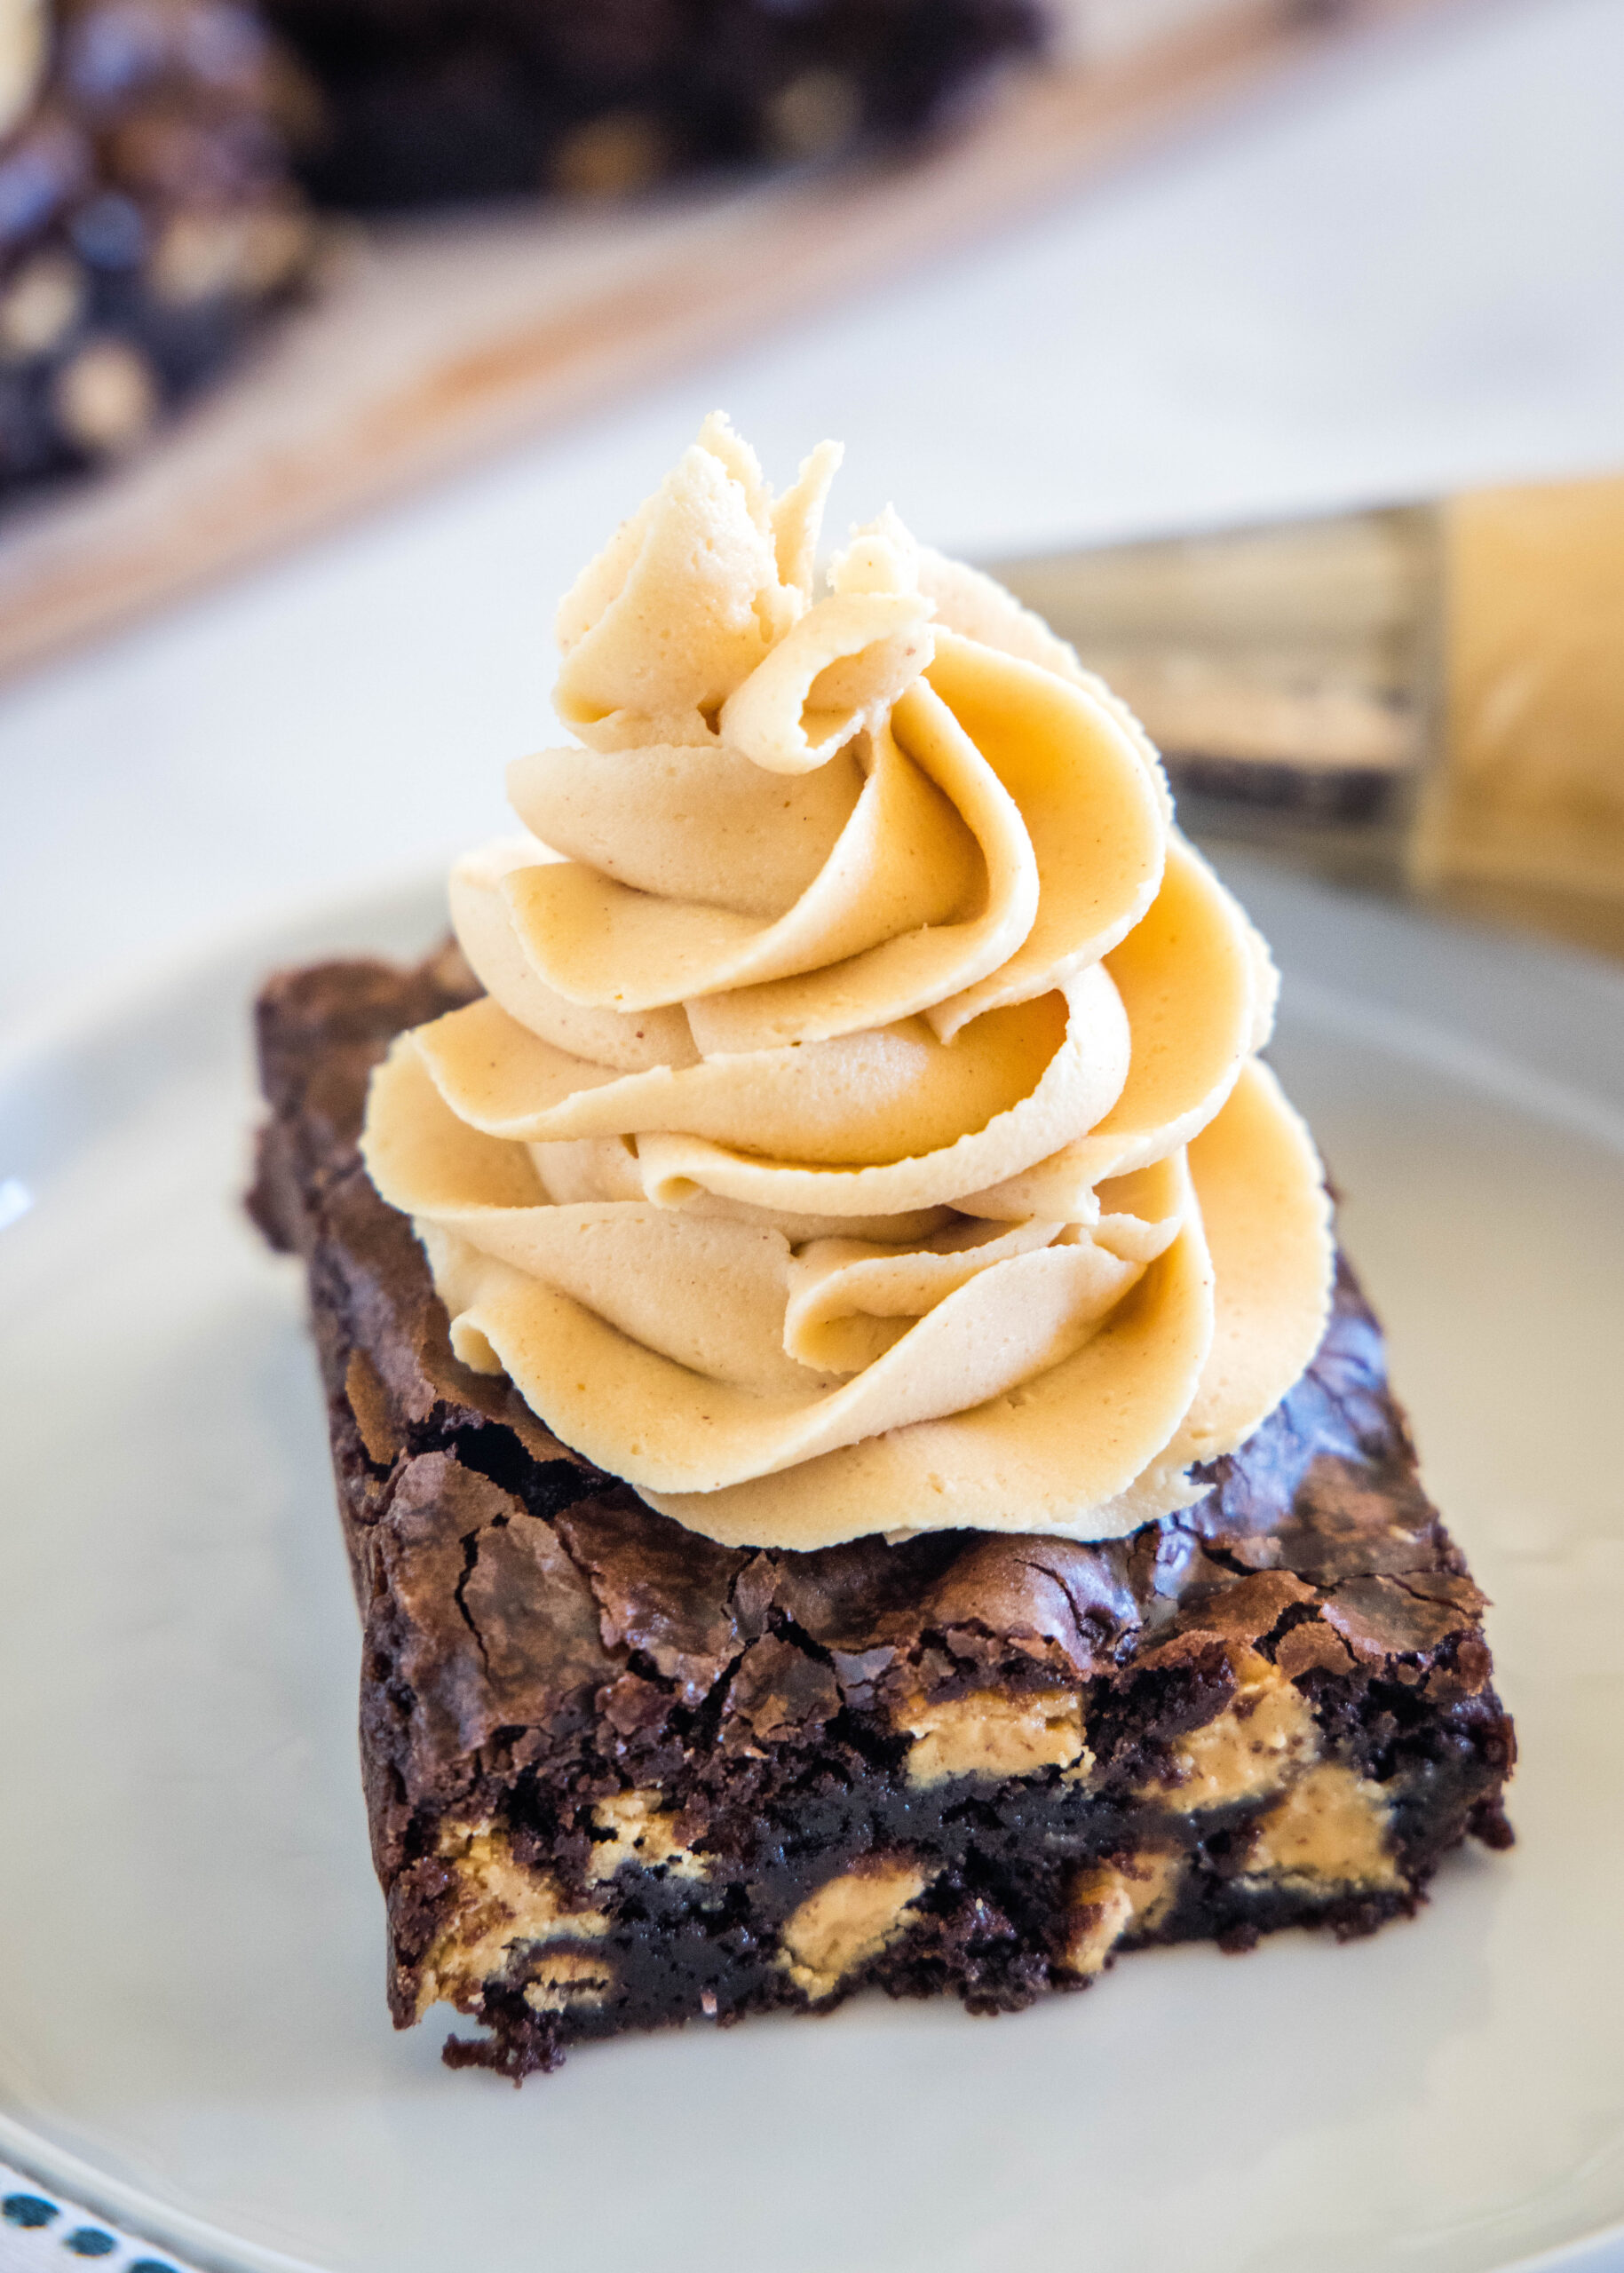 A chocolate brownie topped with a swirl of peanut butter frosting on a plate.